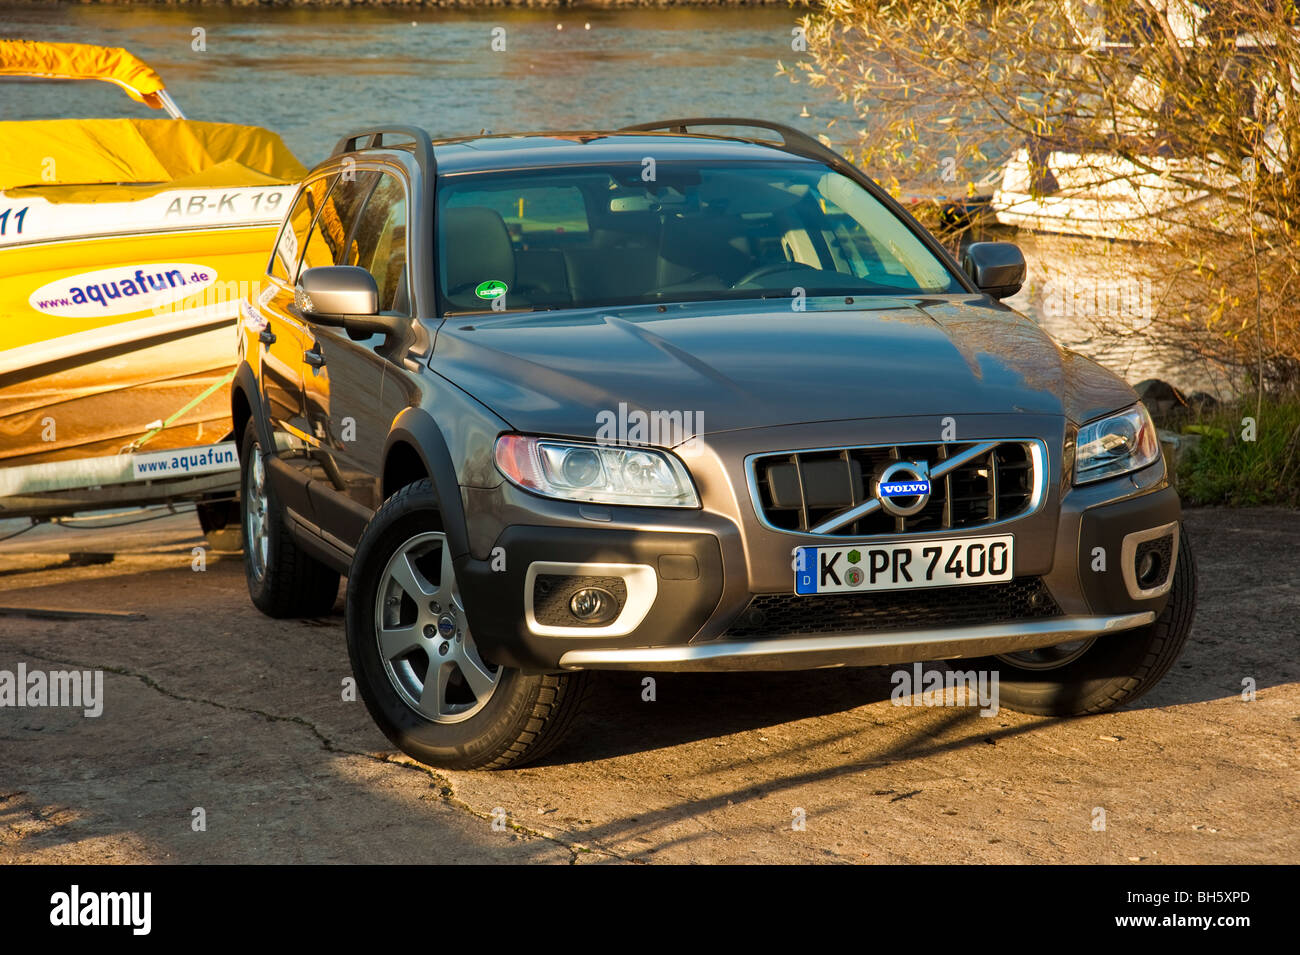 Volvo XC 70 four wheel drive station wagon slipping a yellow power boat at Rhine river Stock Photo